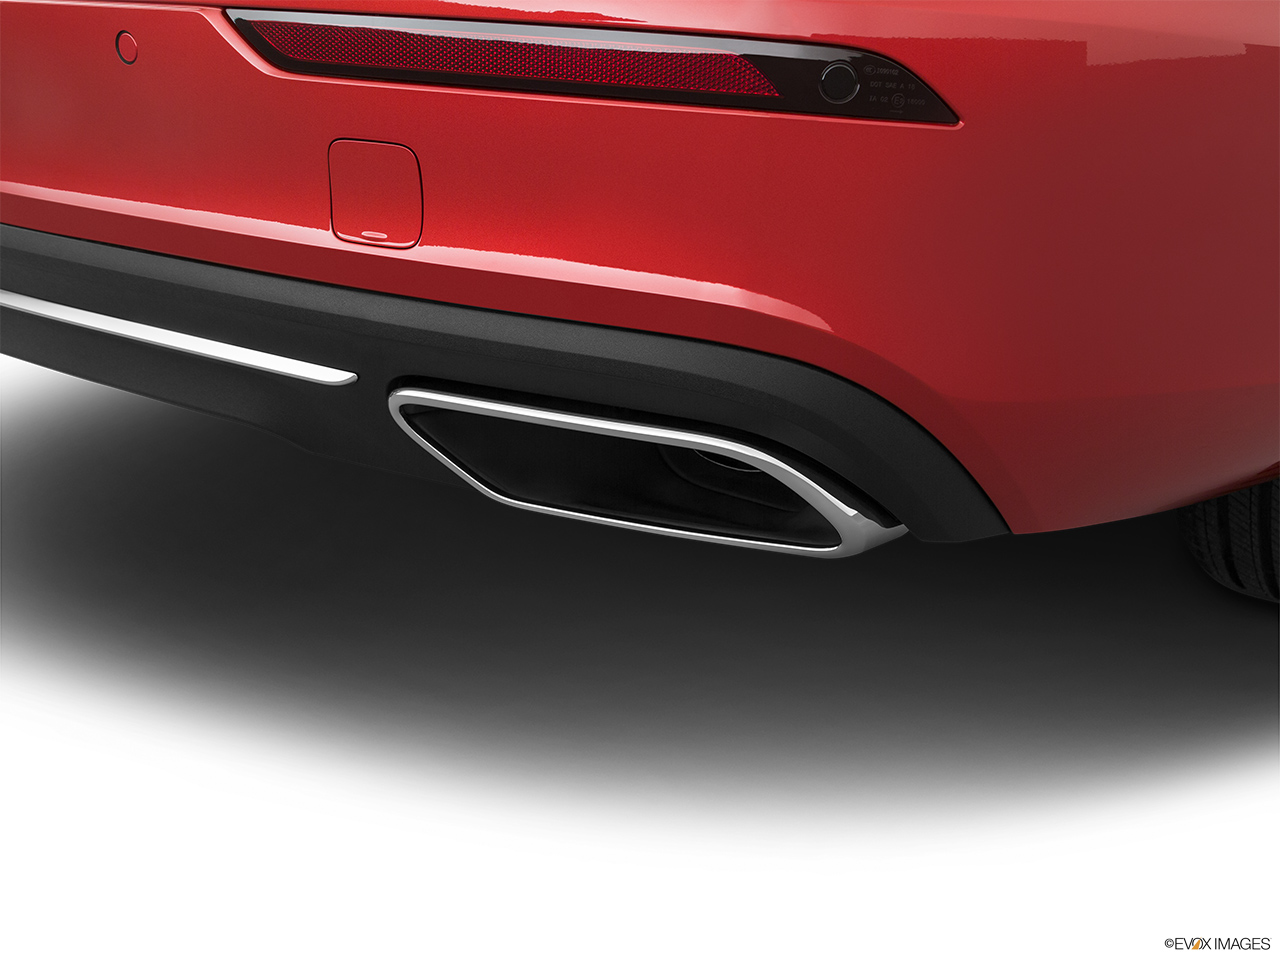 2020 Volvo S60 T5 Inscription Chrome tip exhaust pipe. 